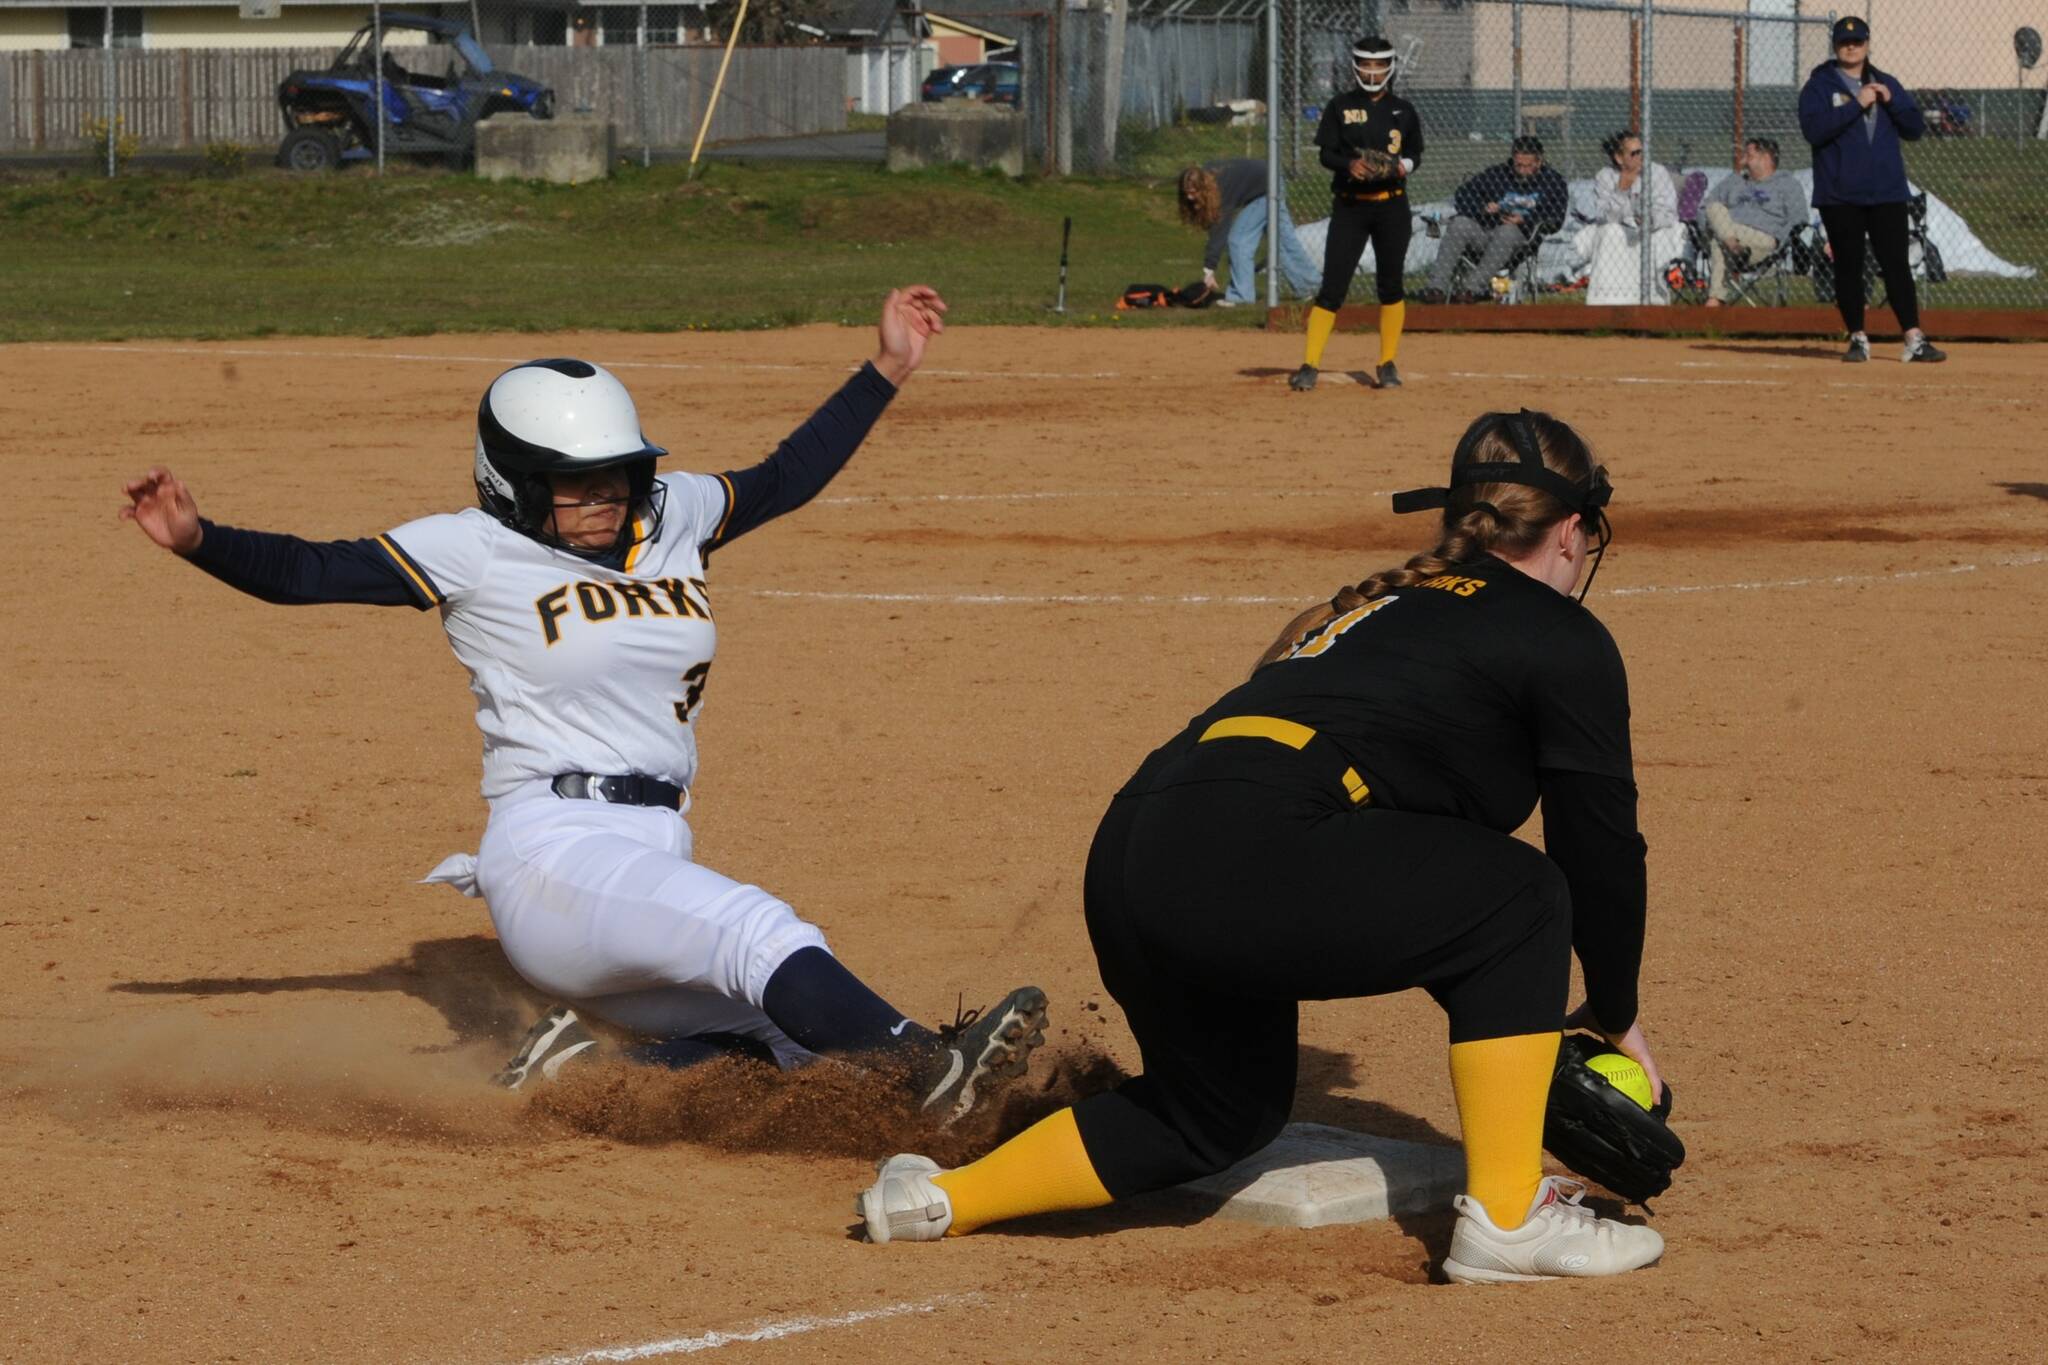 Spartan Donny Williams turns up the soil as she slides safely into third ahead of the throw in this contest in which the Forks Jv’s defeated the North Beach varsity 20 to 5 at Tillicum Park. Photo by Lonnie Archibald